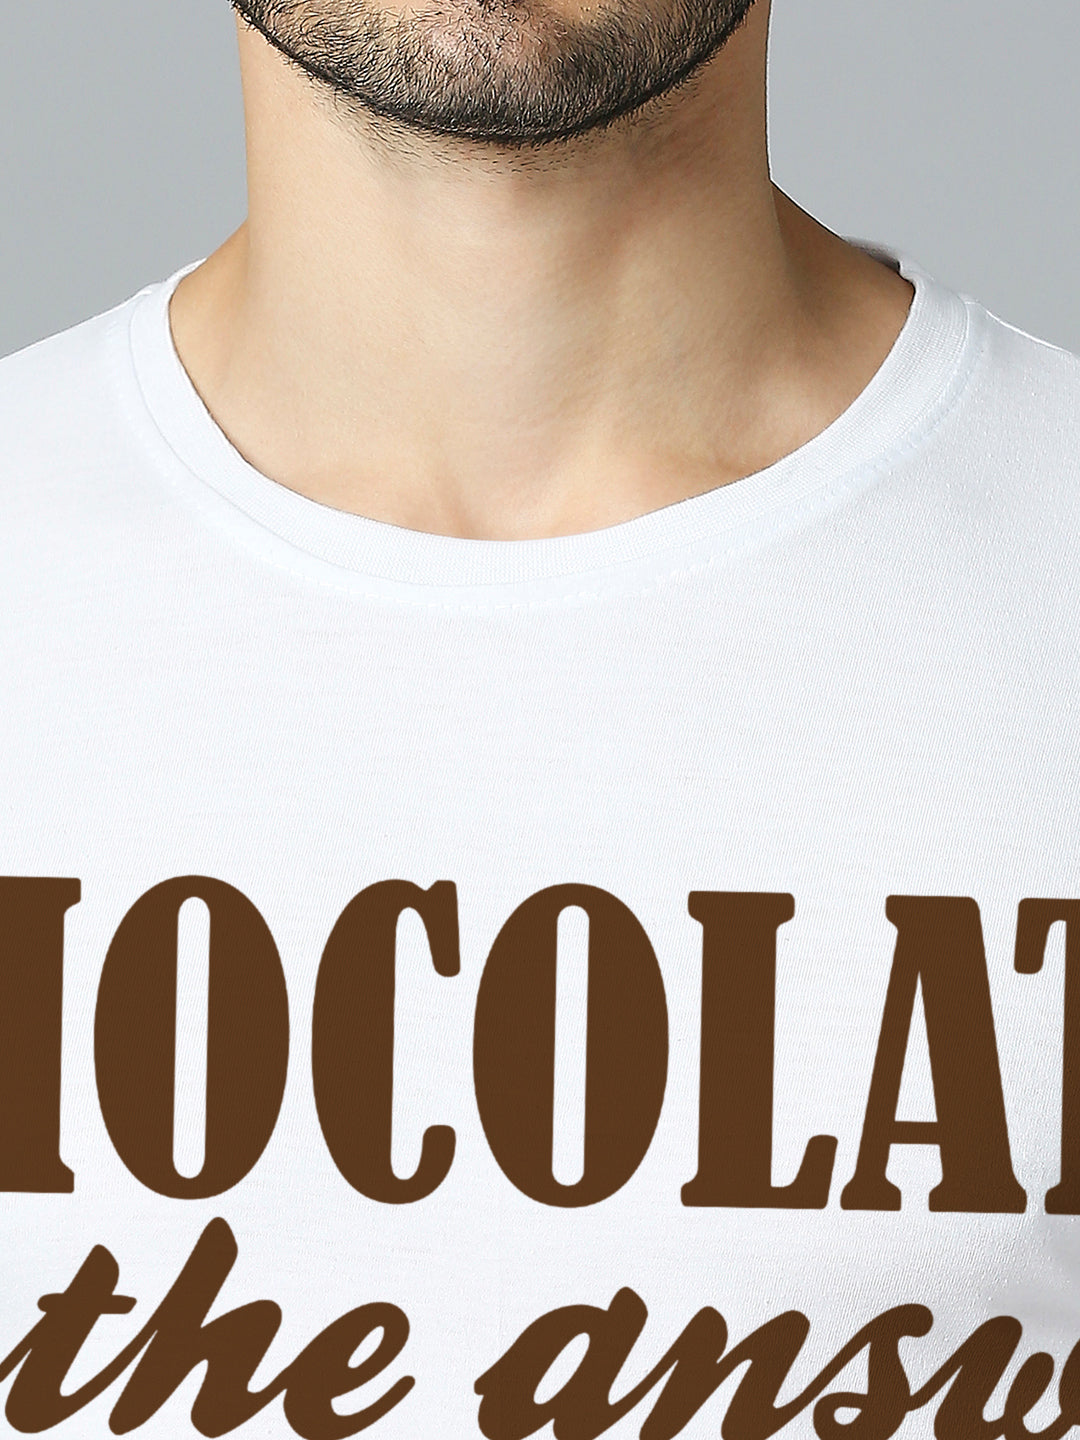 Chocolate Is Always The Answer T-Shirt